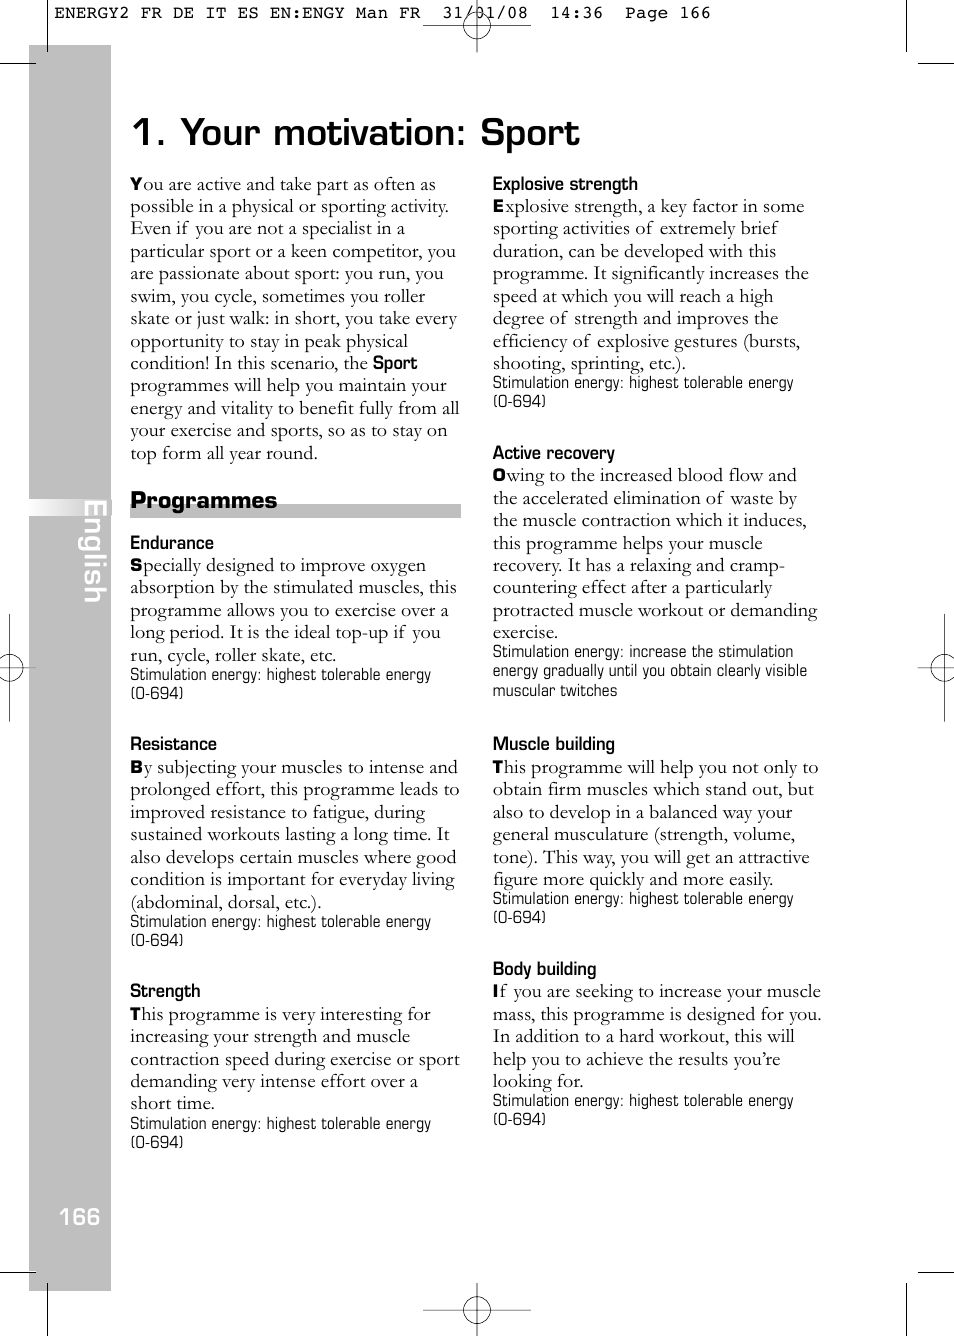 Your motivation: sport, English | Compex Energy mi-Ready User Manual | Page  168 / 183 | Original mode